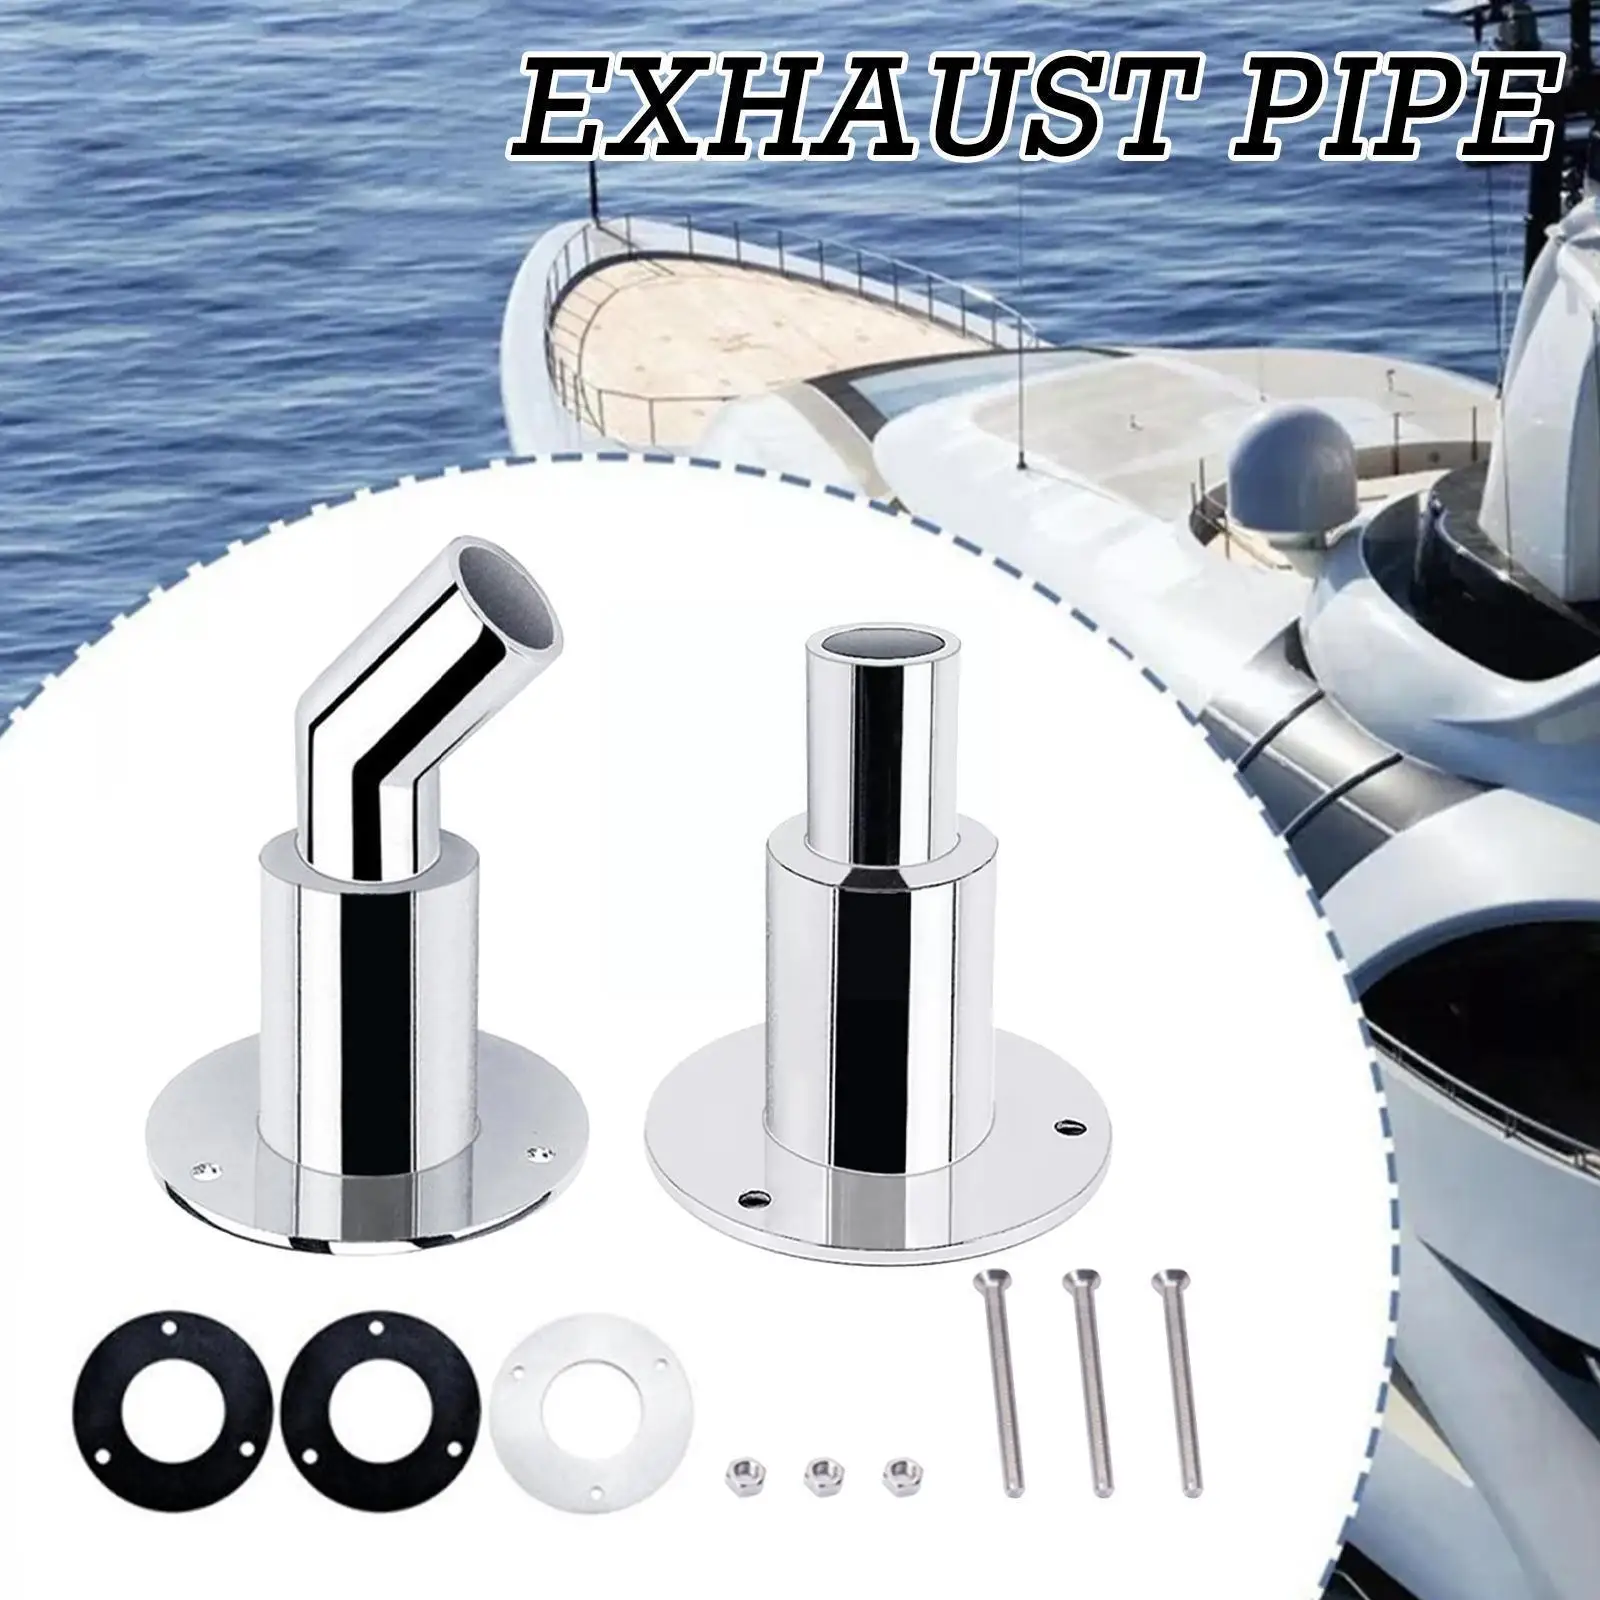 

Steel Parking Heater Exhaust Fitting Adapter Thru Hardware Of Exhaust Heater Hull Pipe Socket Part For Tube F2o8